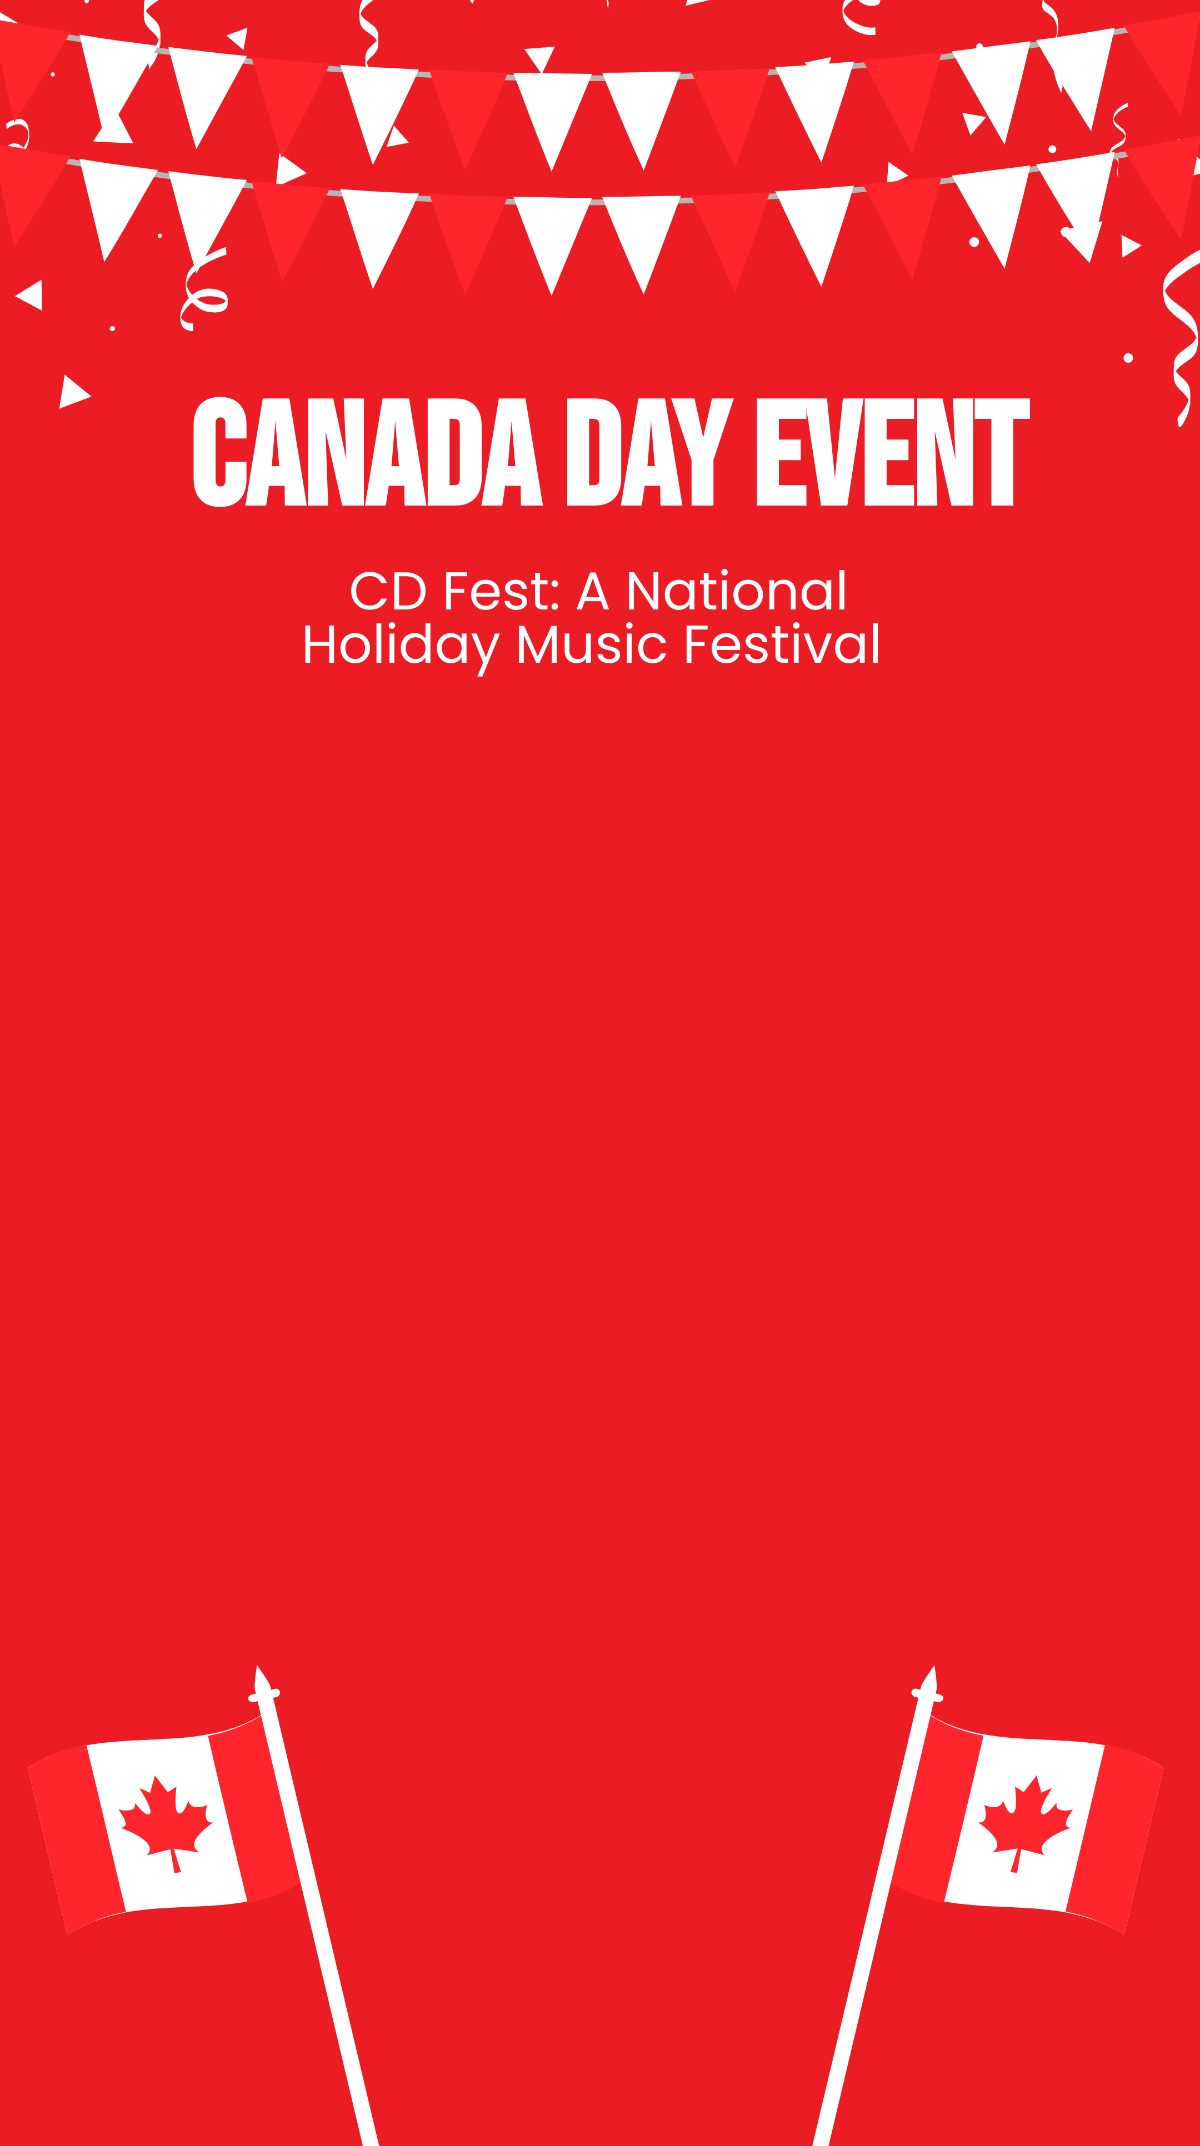 Canada Day Event Snapchat Geofilter